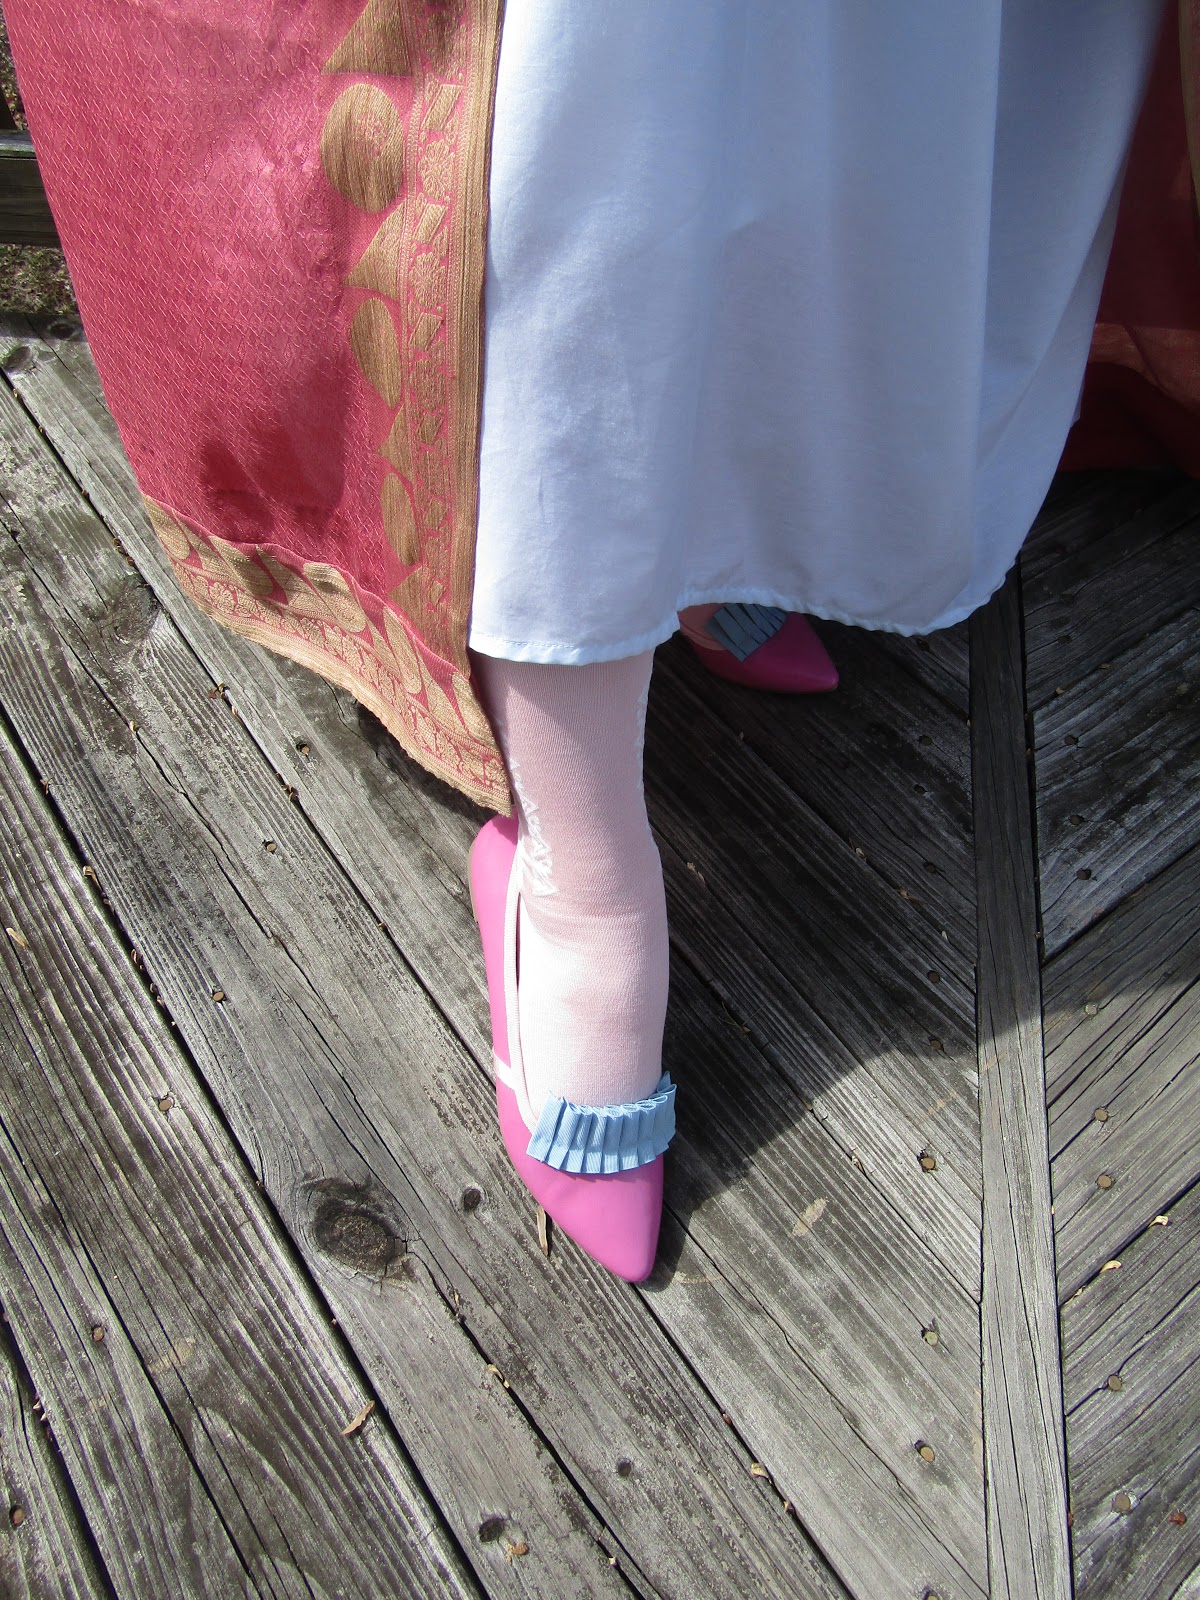 A Sartorial Statement: Pink Painted Shoes